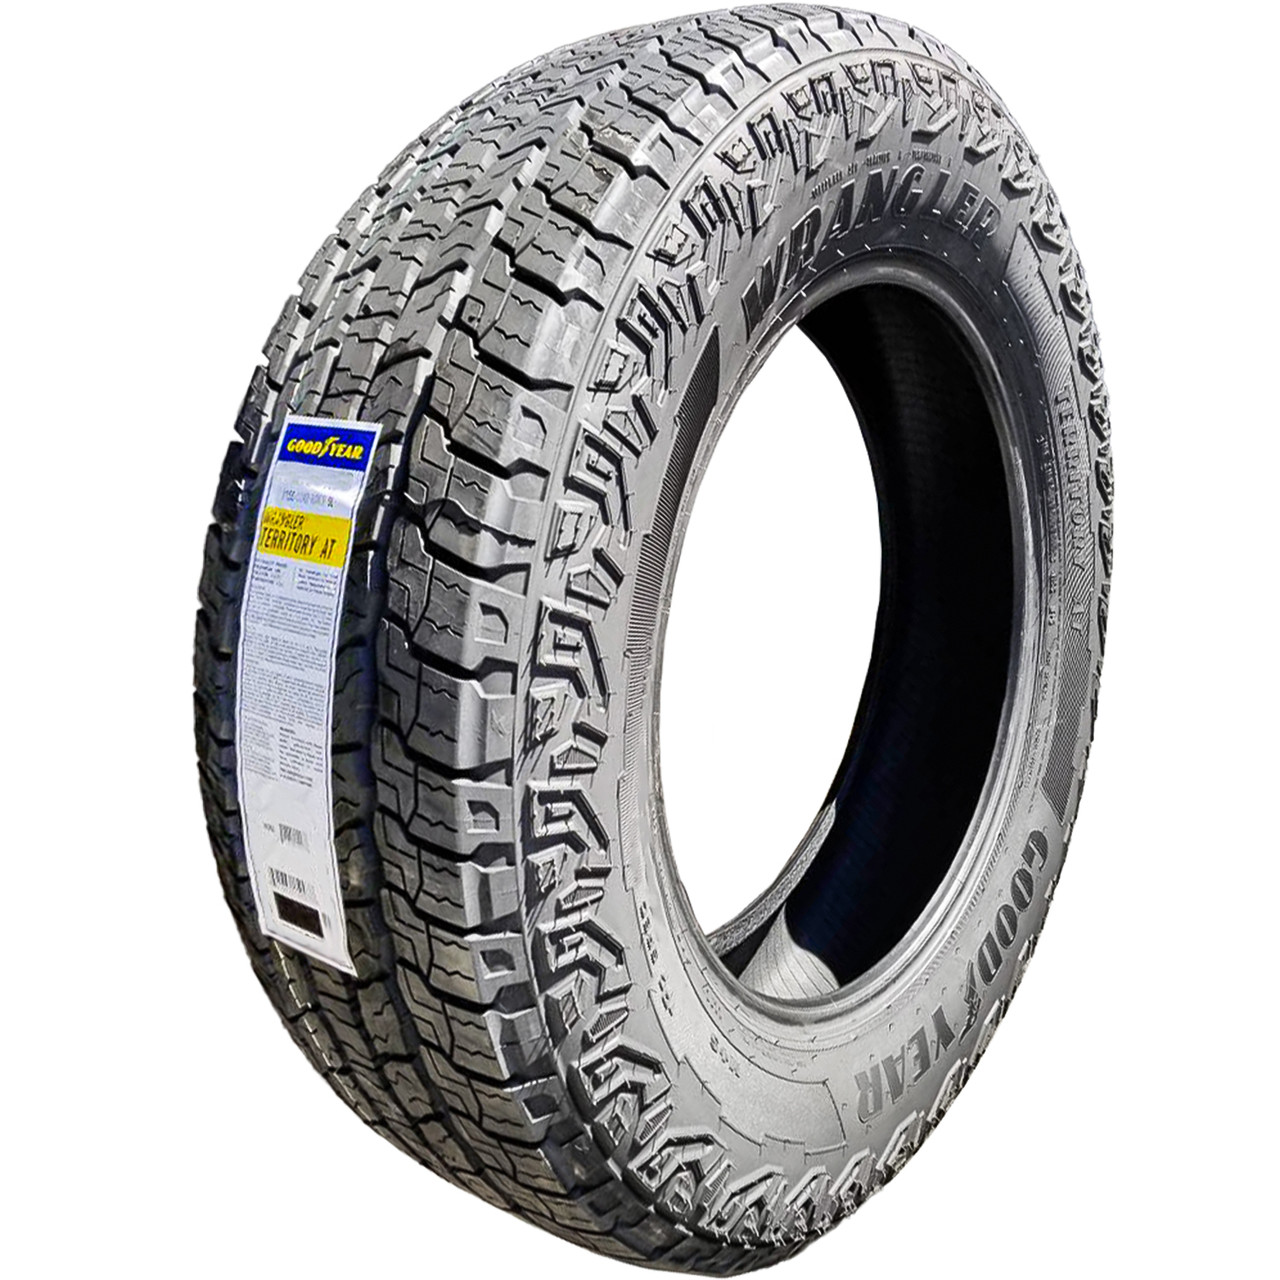 Goodyear Wrangler Territory A/T 275/65R18 116T AT All Terrain Tire